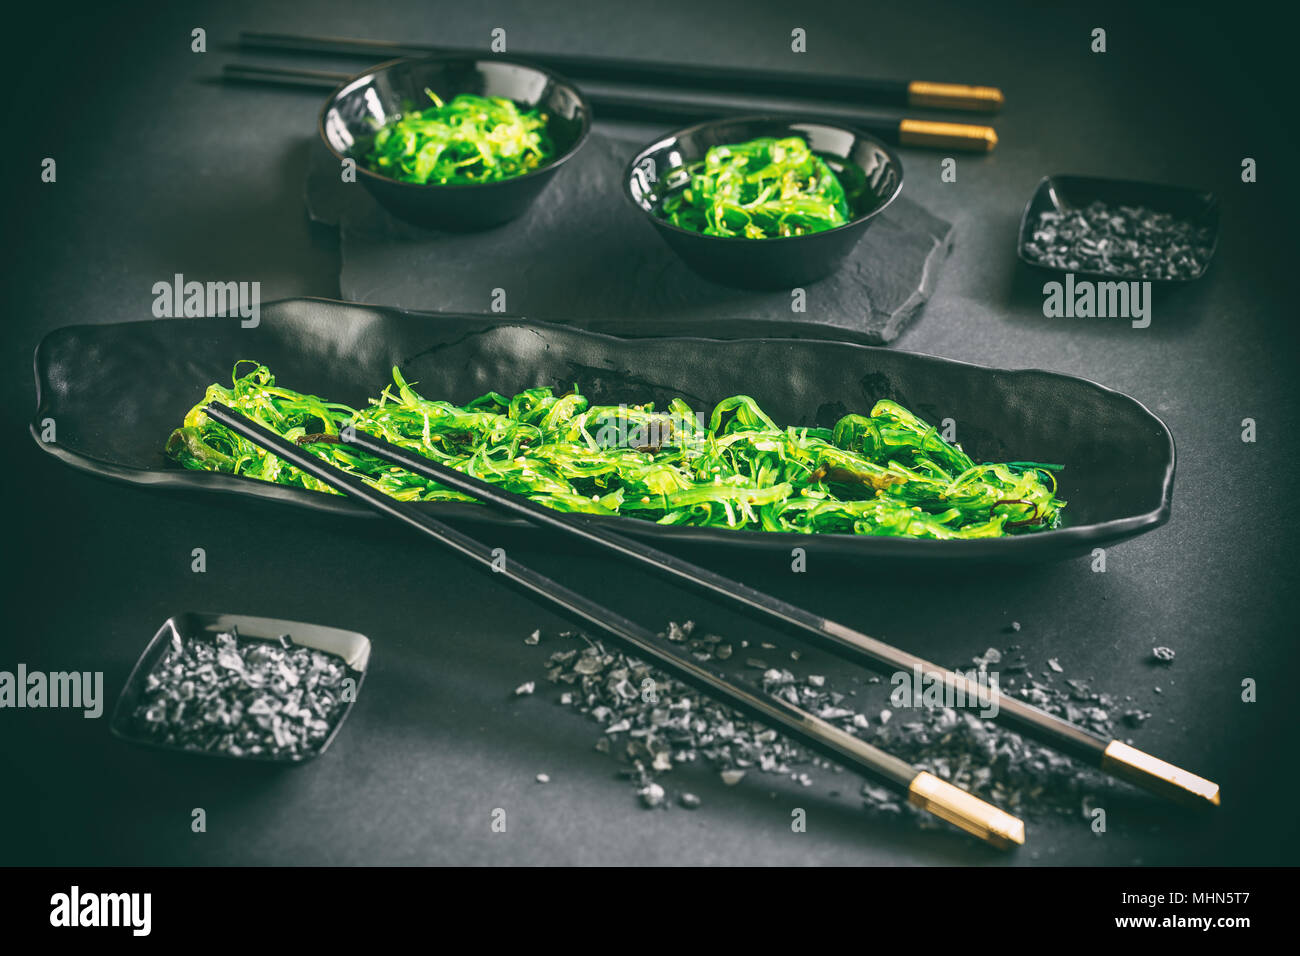 Japanese seaweed salad in a bowl on black background Stock Photo